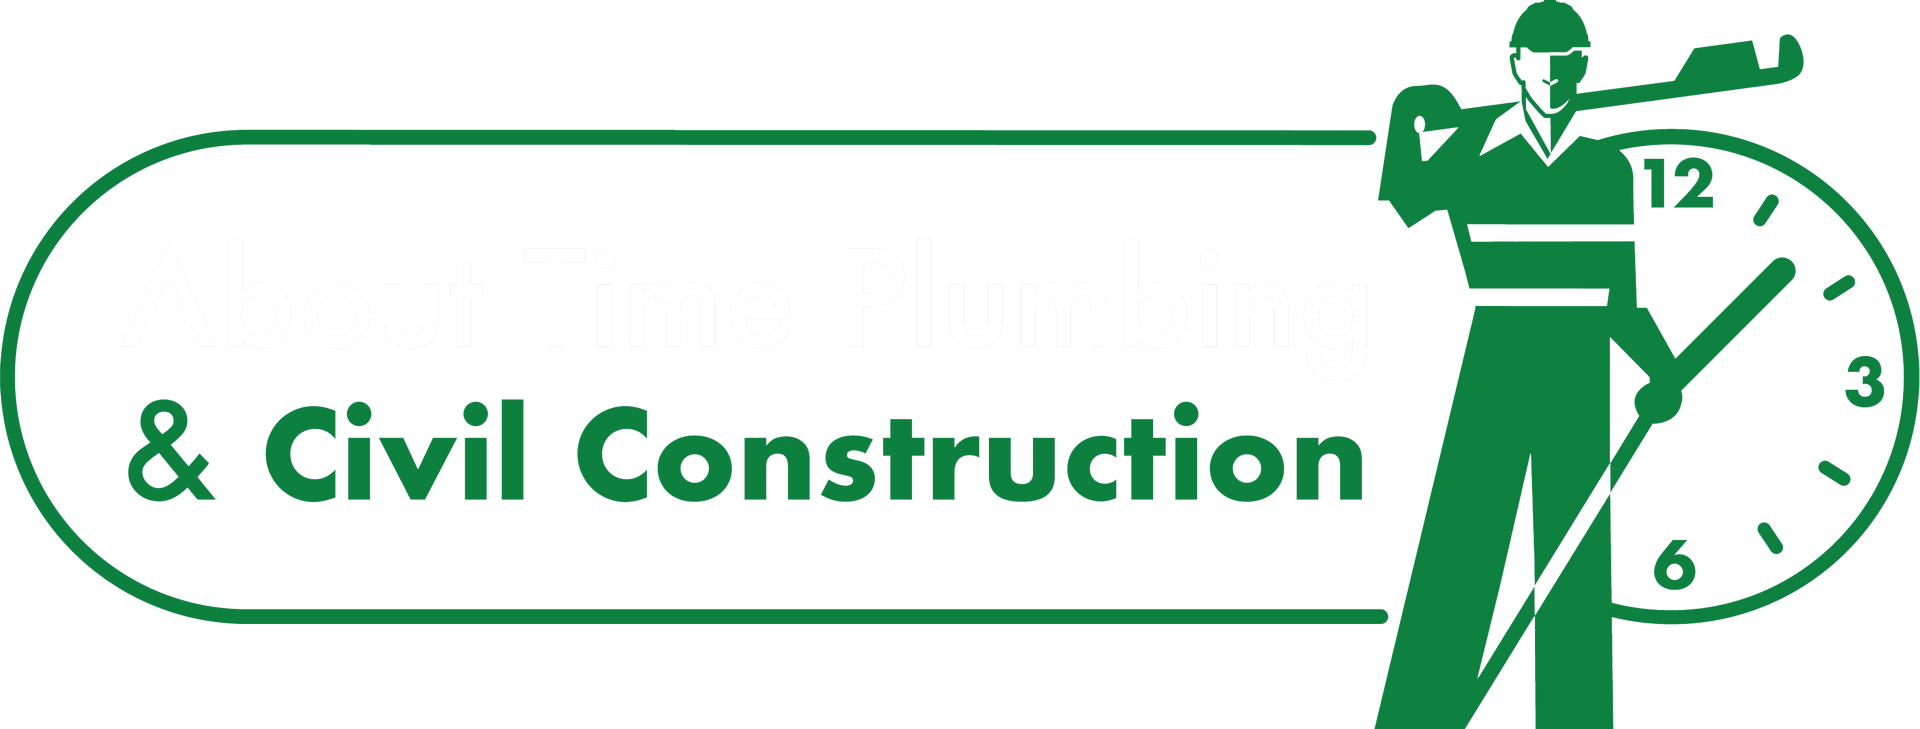 About Time Plumbing & Civil Construction in Moss Vale, NSW